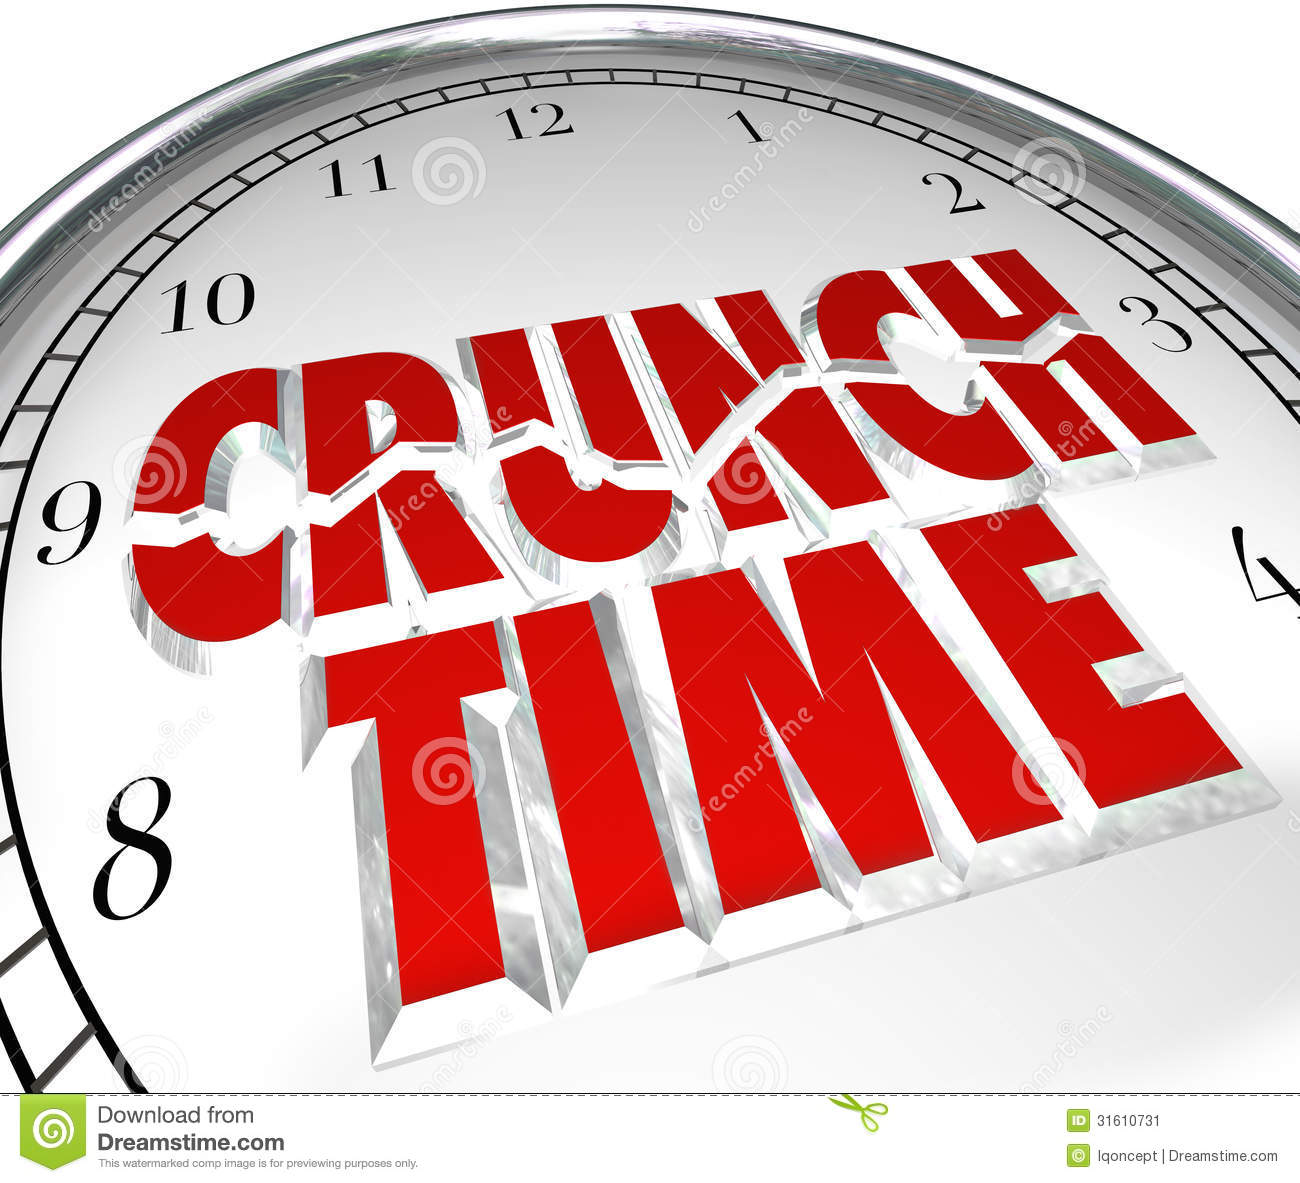 Crunch Time Clock Hurry Rush Deadline Final Moment Stock Image   Image